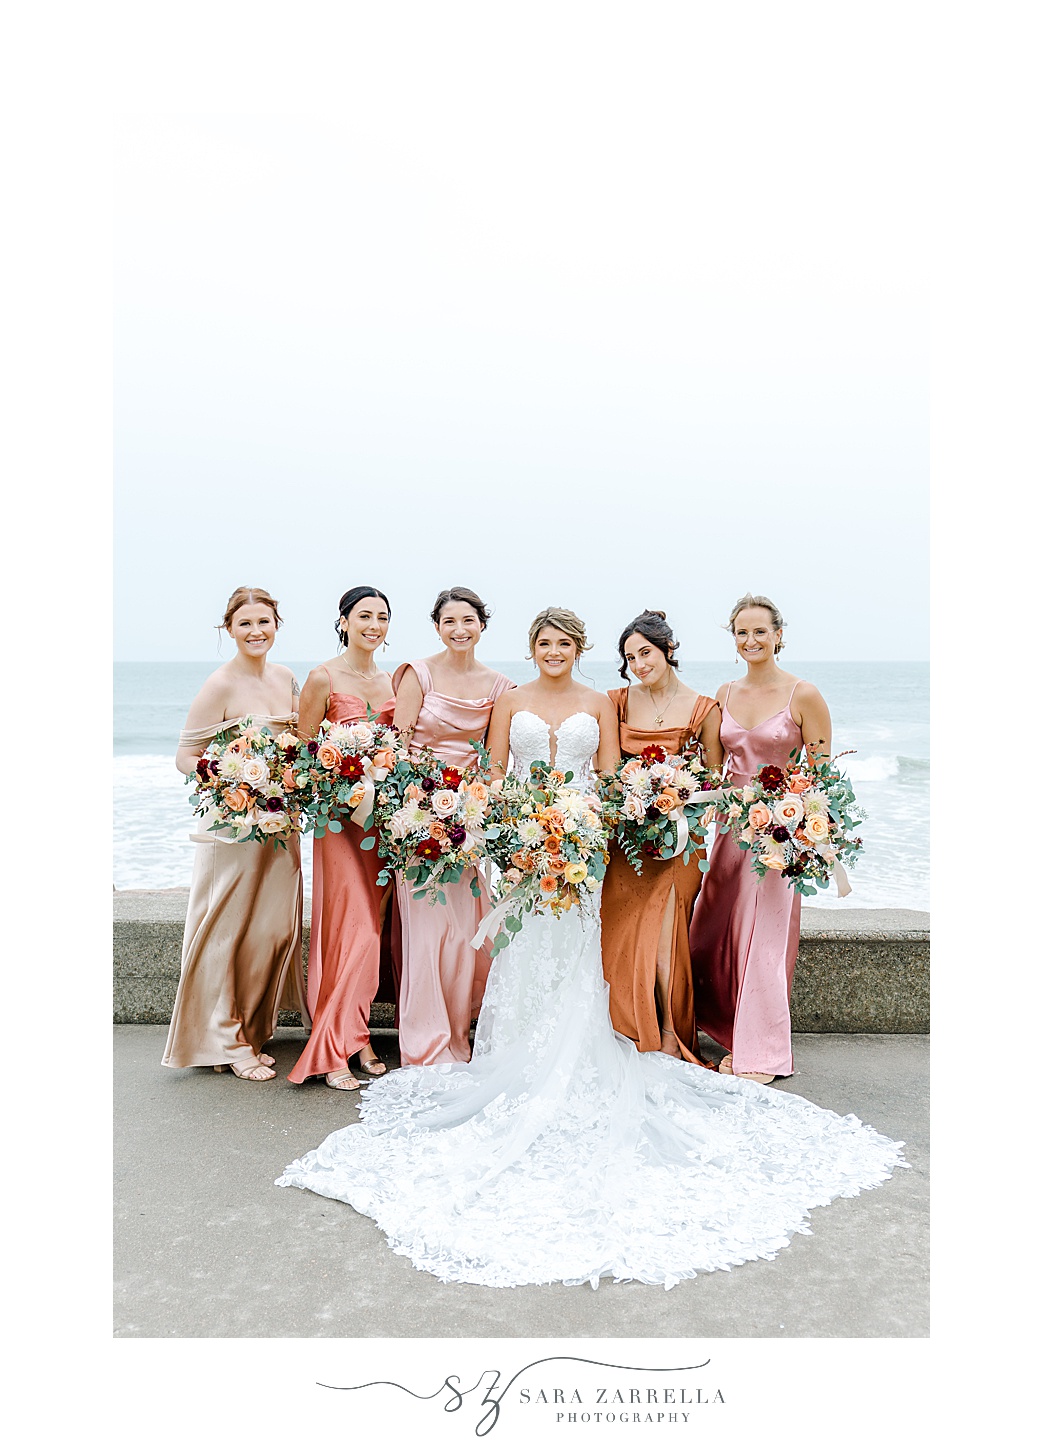 bride and bridesmaids in metallic gowns in various shades of pink pose in front of ocean